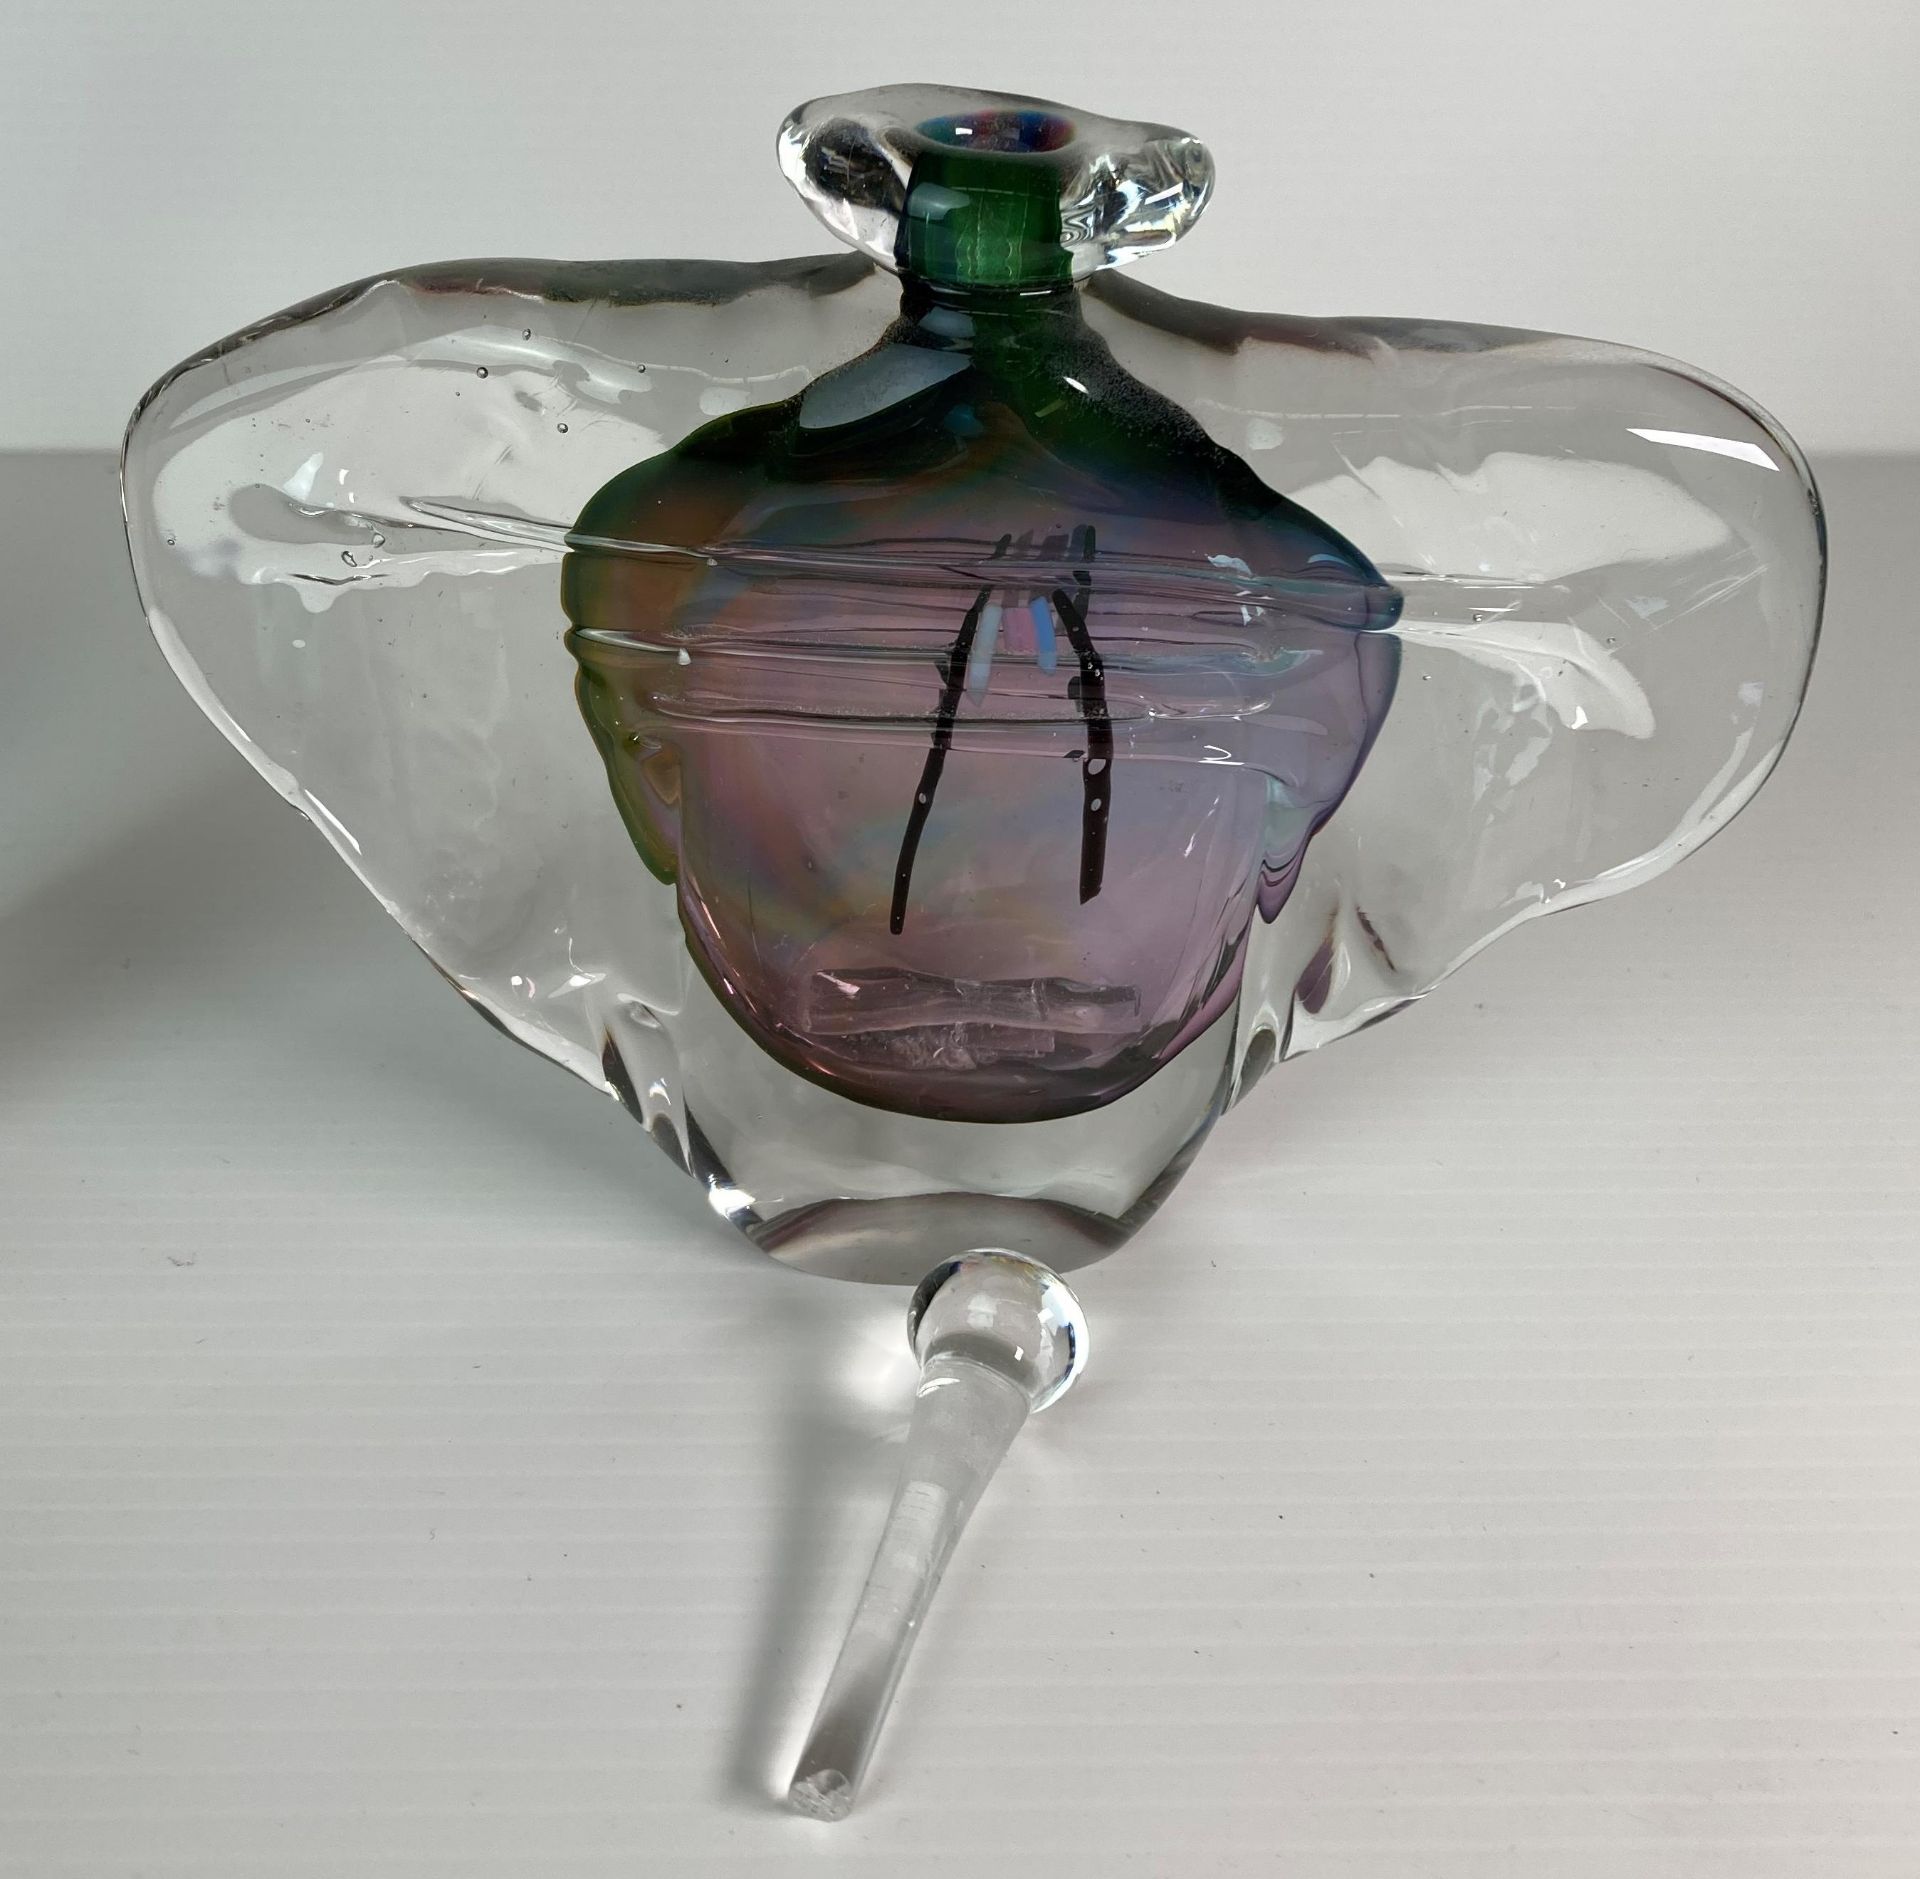 A Karlin Rushbrooke hand-made glass wedge bottle and stopper with signature to base (18cm high), - Image 3 of 5